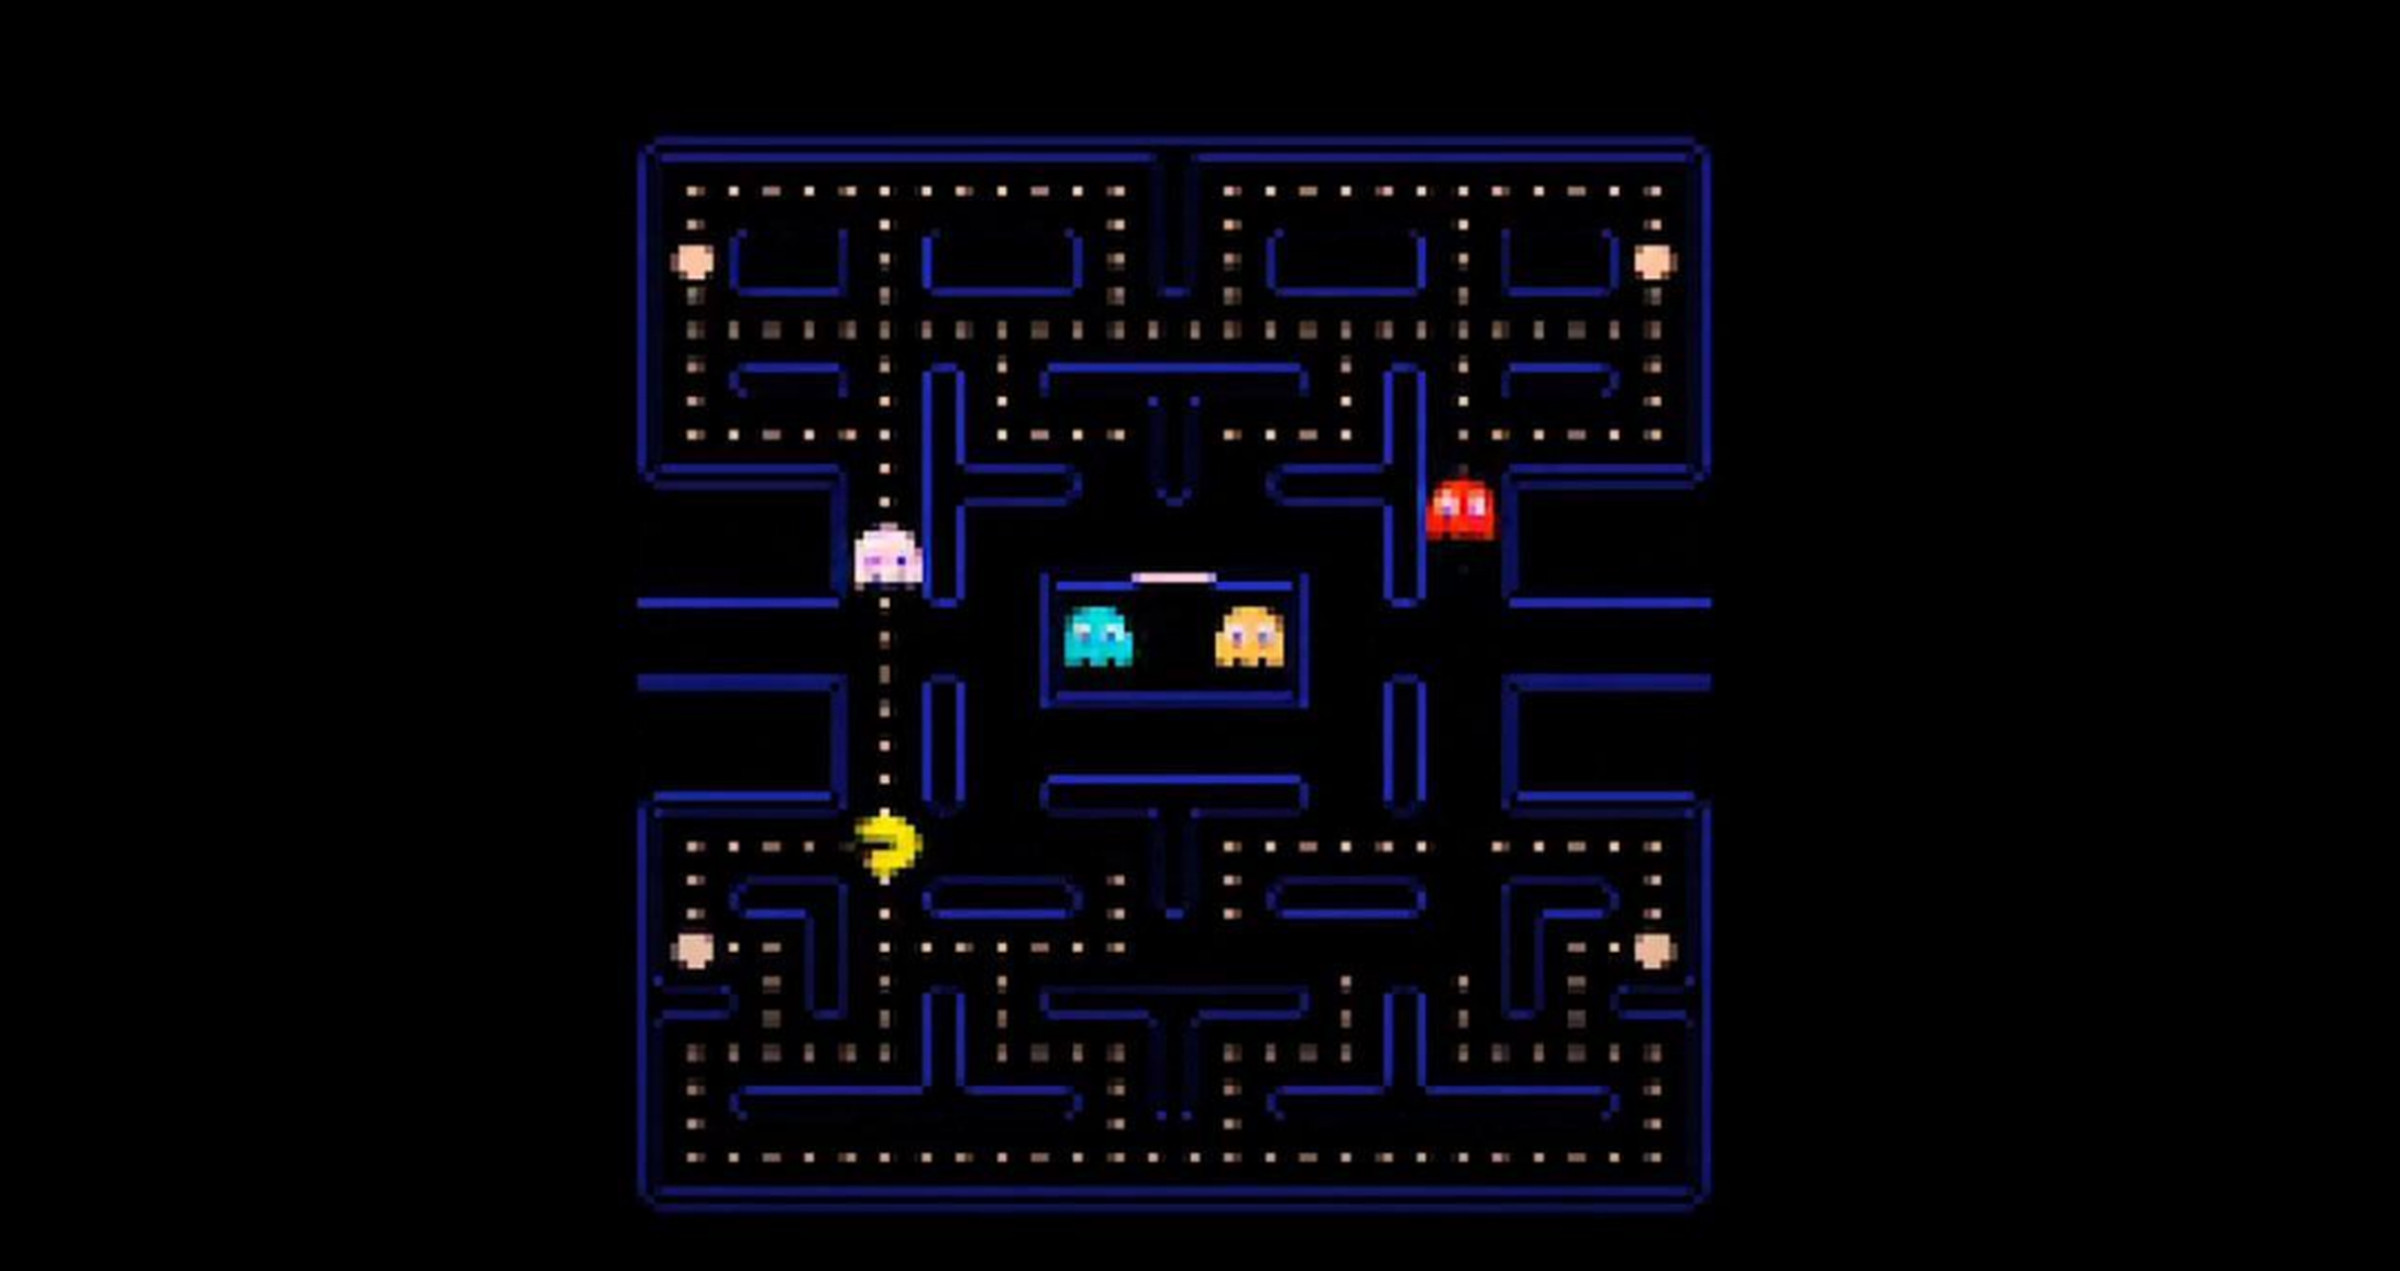 The AI-generated Pac-Man is a little blurry, but all the basics are there.